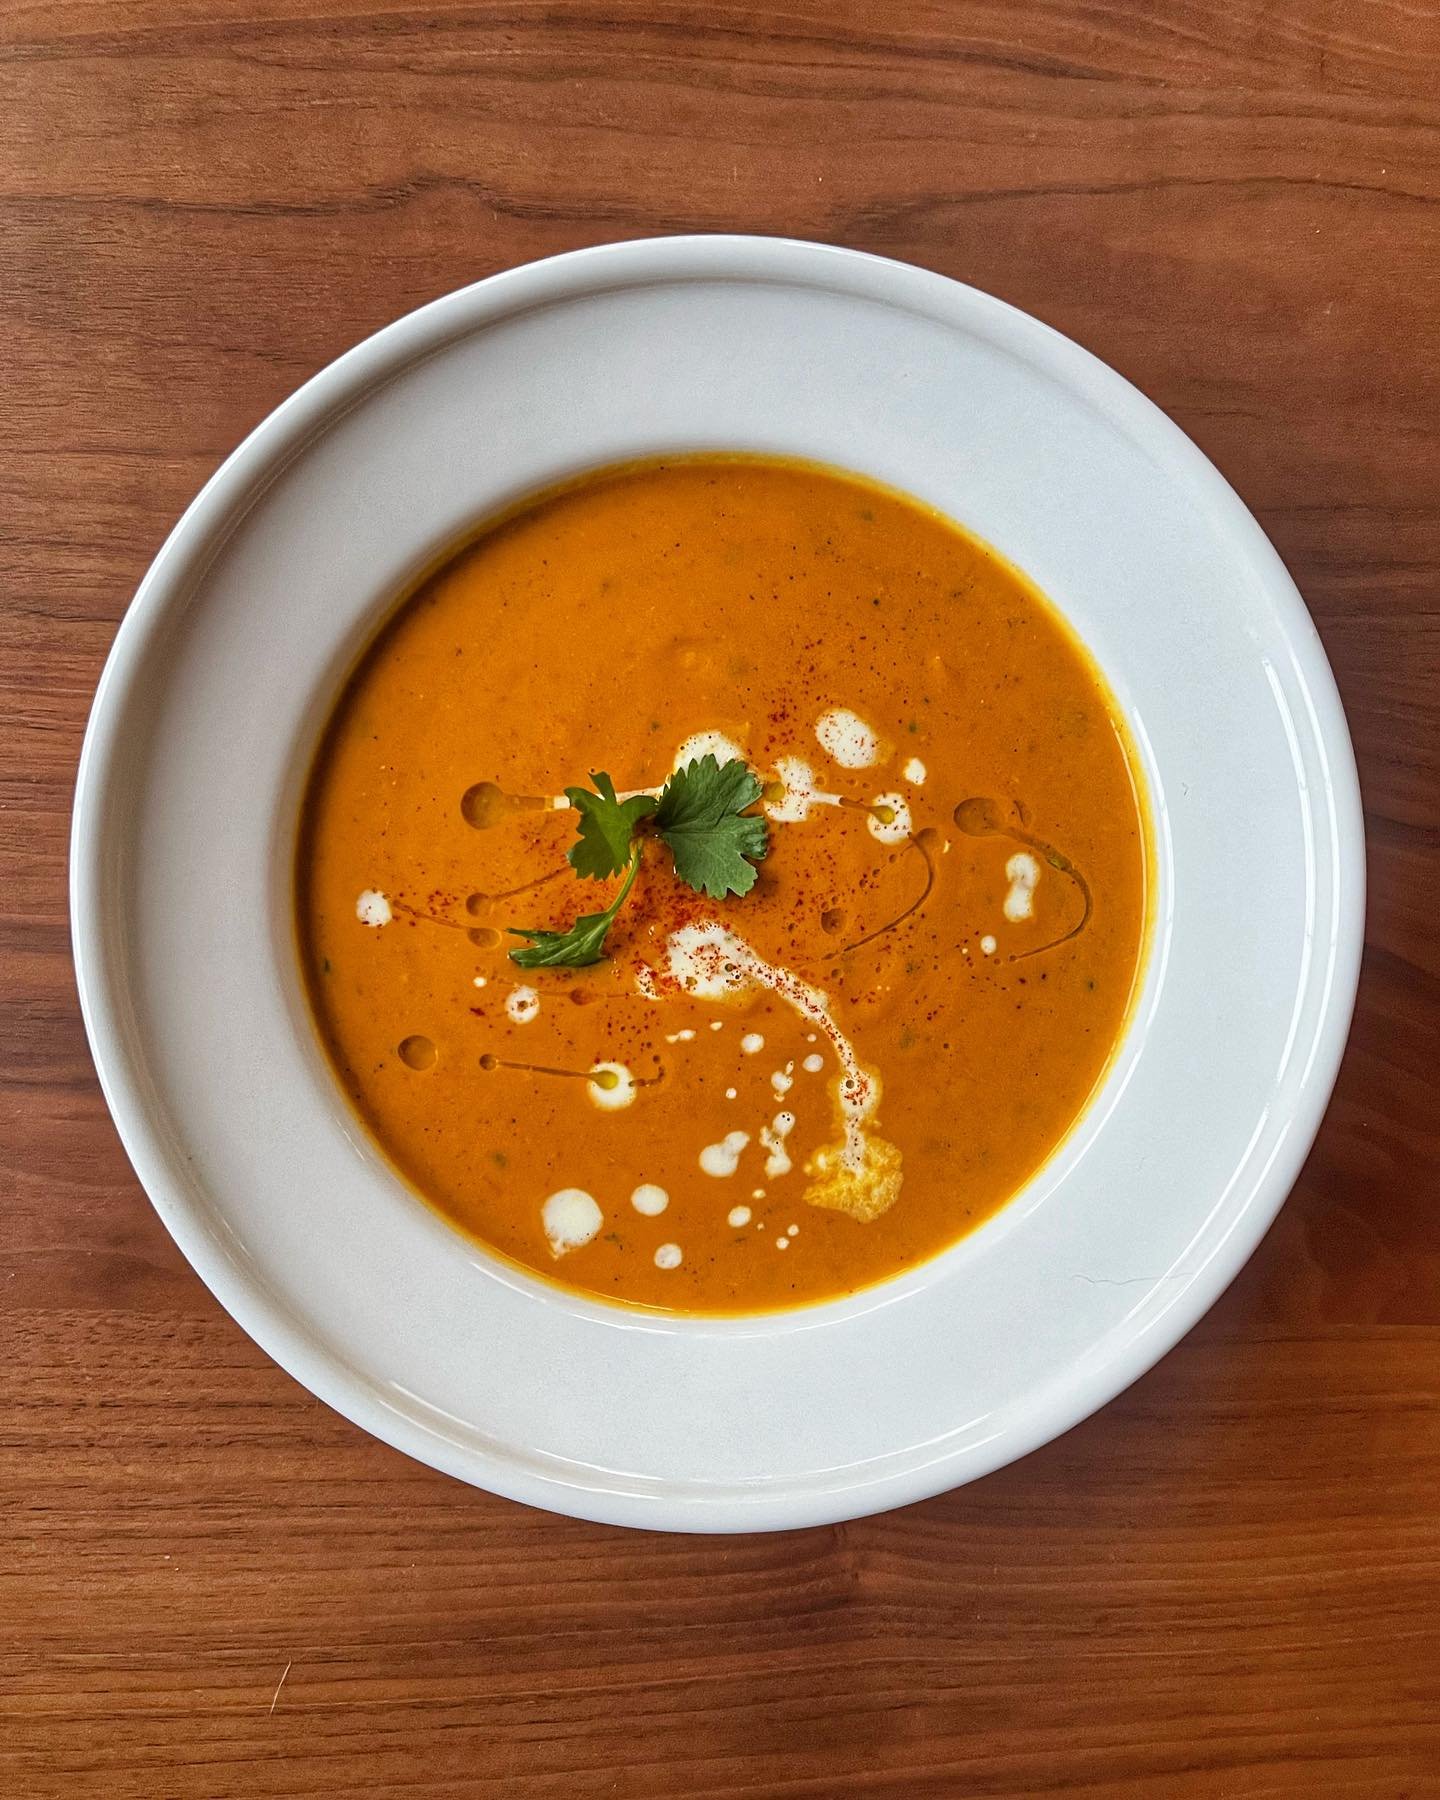 This winter gourd soup is one of my favorites! A mixture of honey nut and butternut squash gives off a succulent flavor and this weekend I&rsquo;m pairing it with fresh scallops. Want a taste?!

I have availability Sunday, January 21st - kick back an